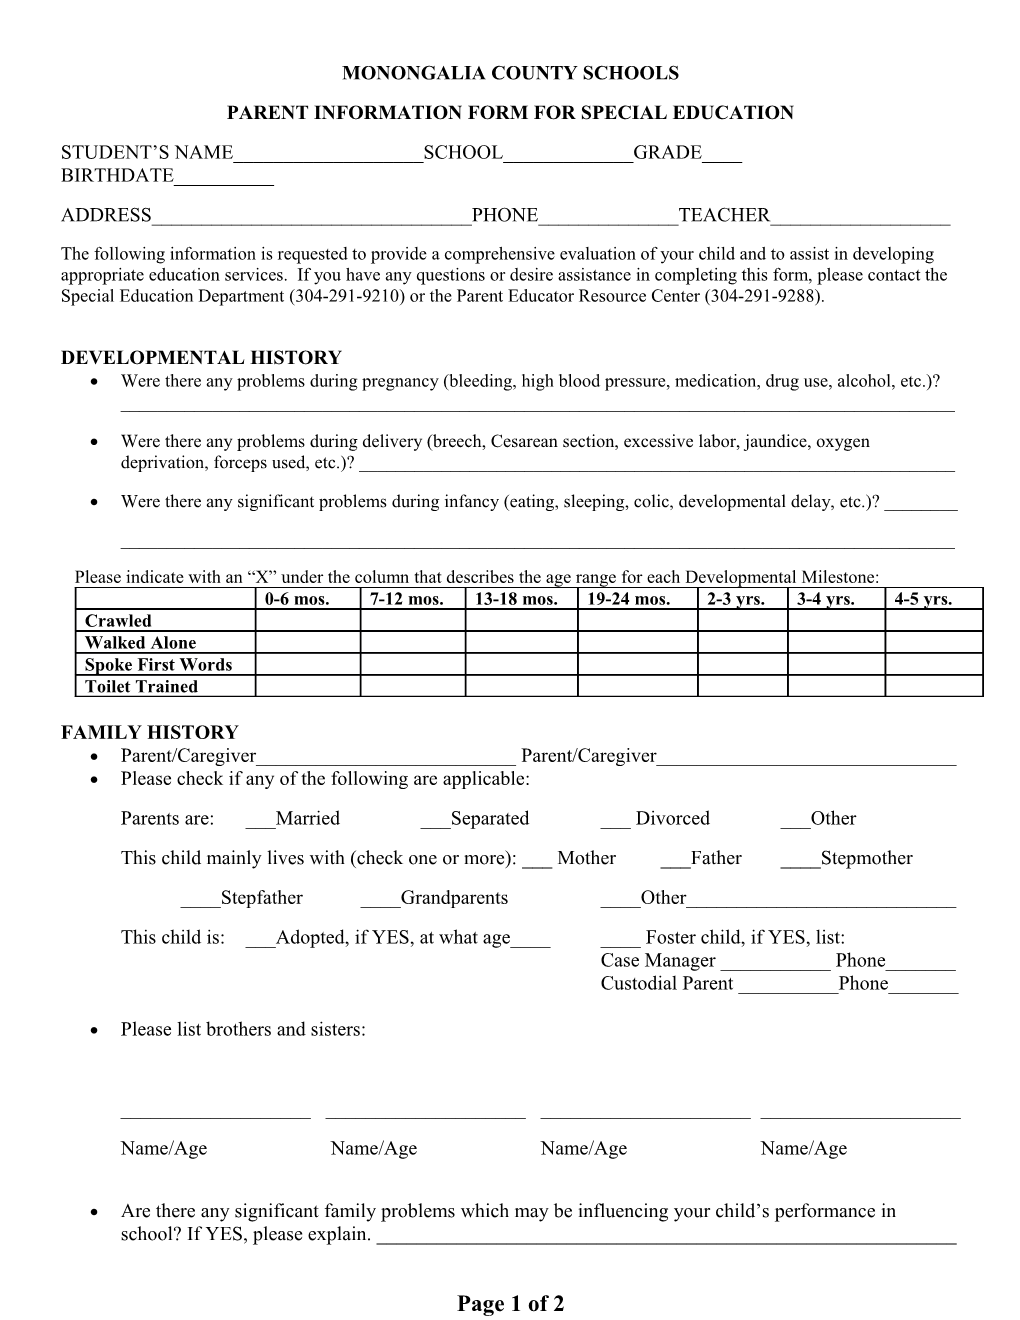 Parent Information Form for Special Education